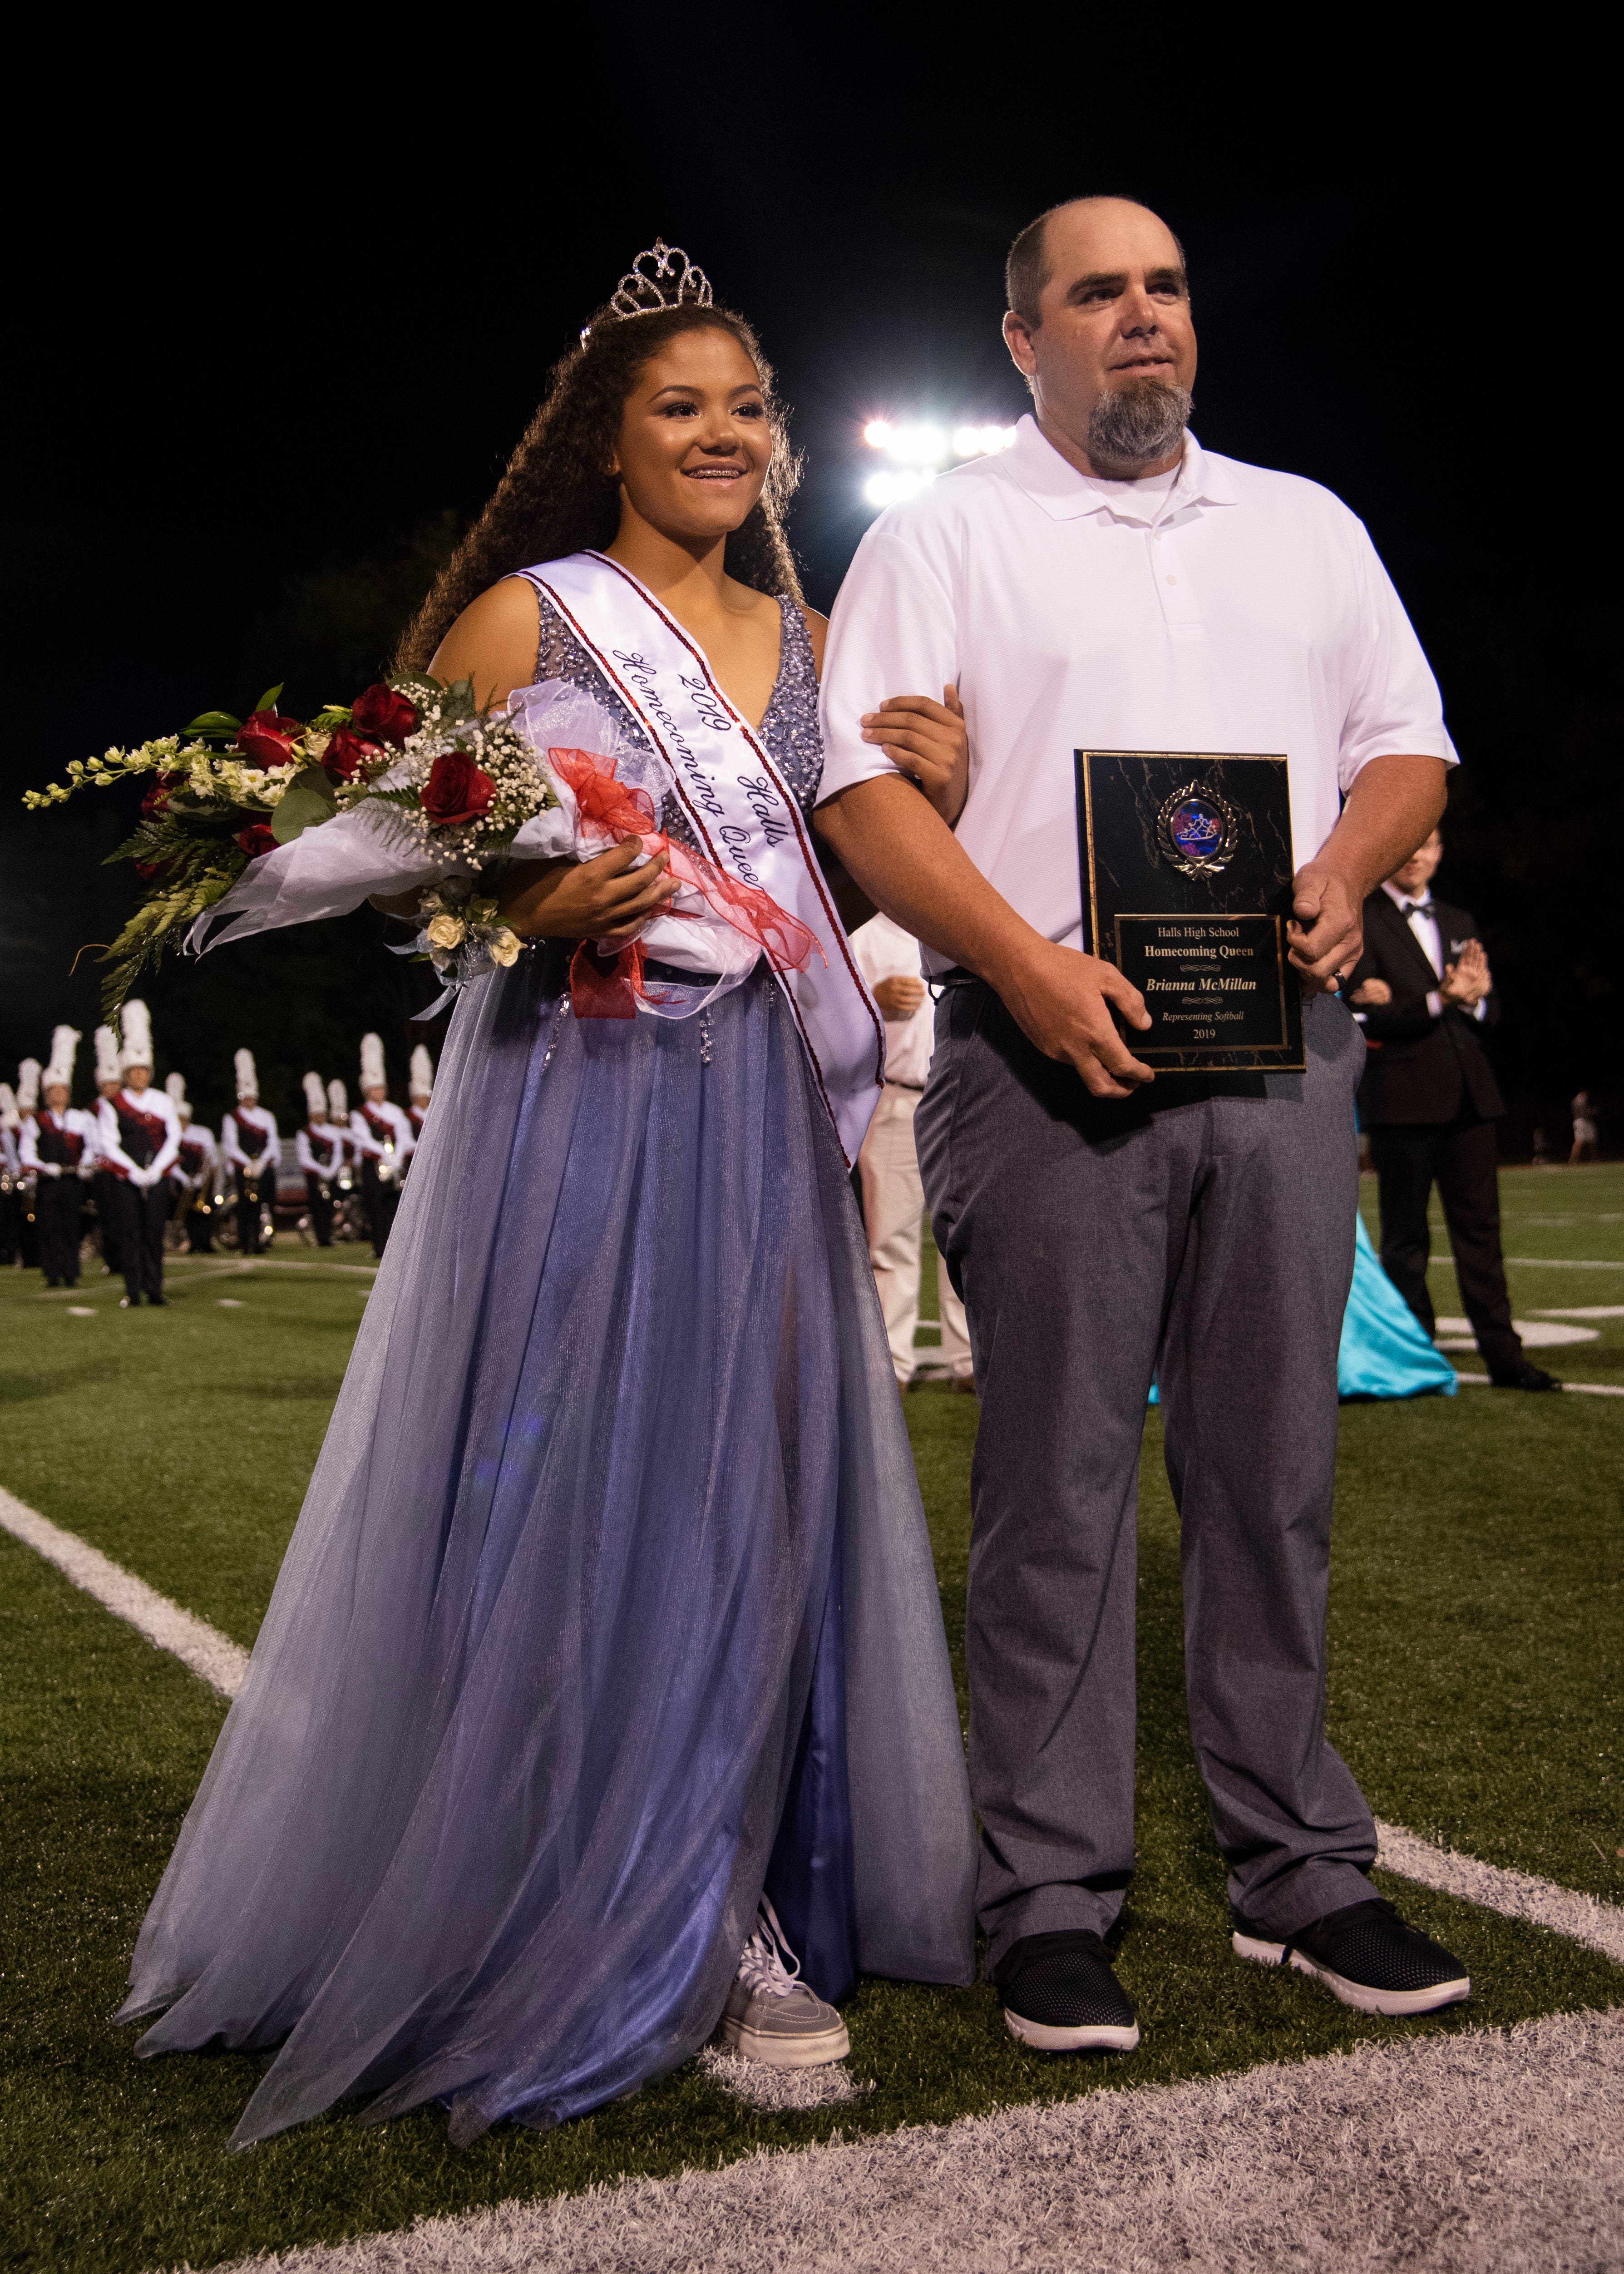 Brianna McMill was crowned 2019 Halls High homecoming queen during the game against Central on Friday, Oct. 4.